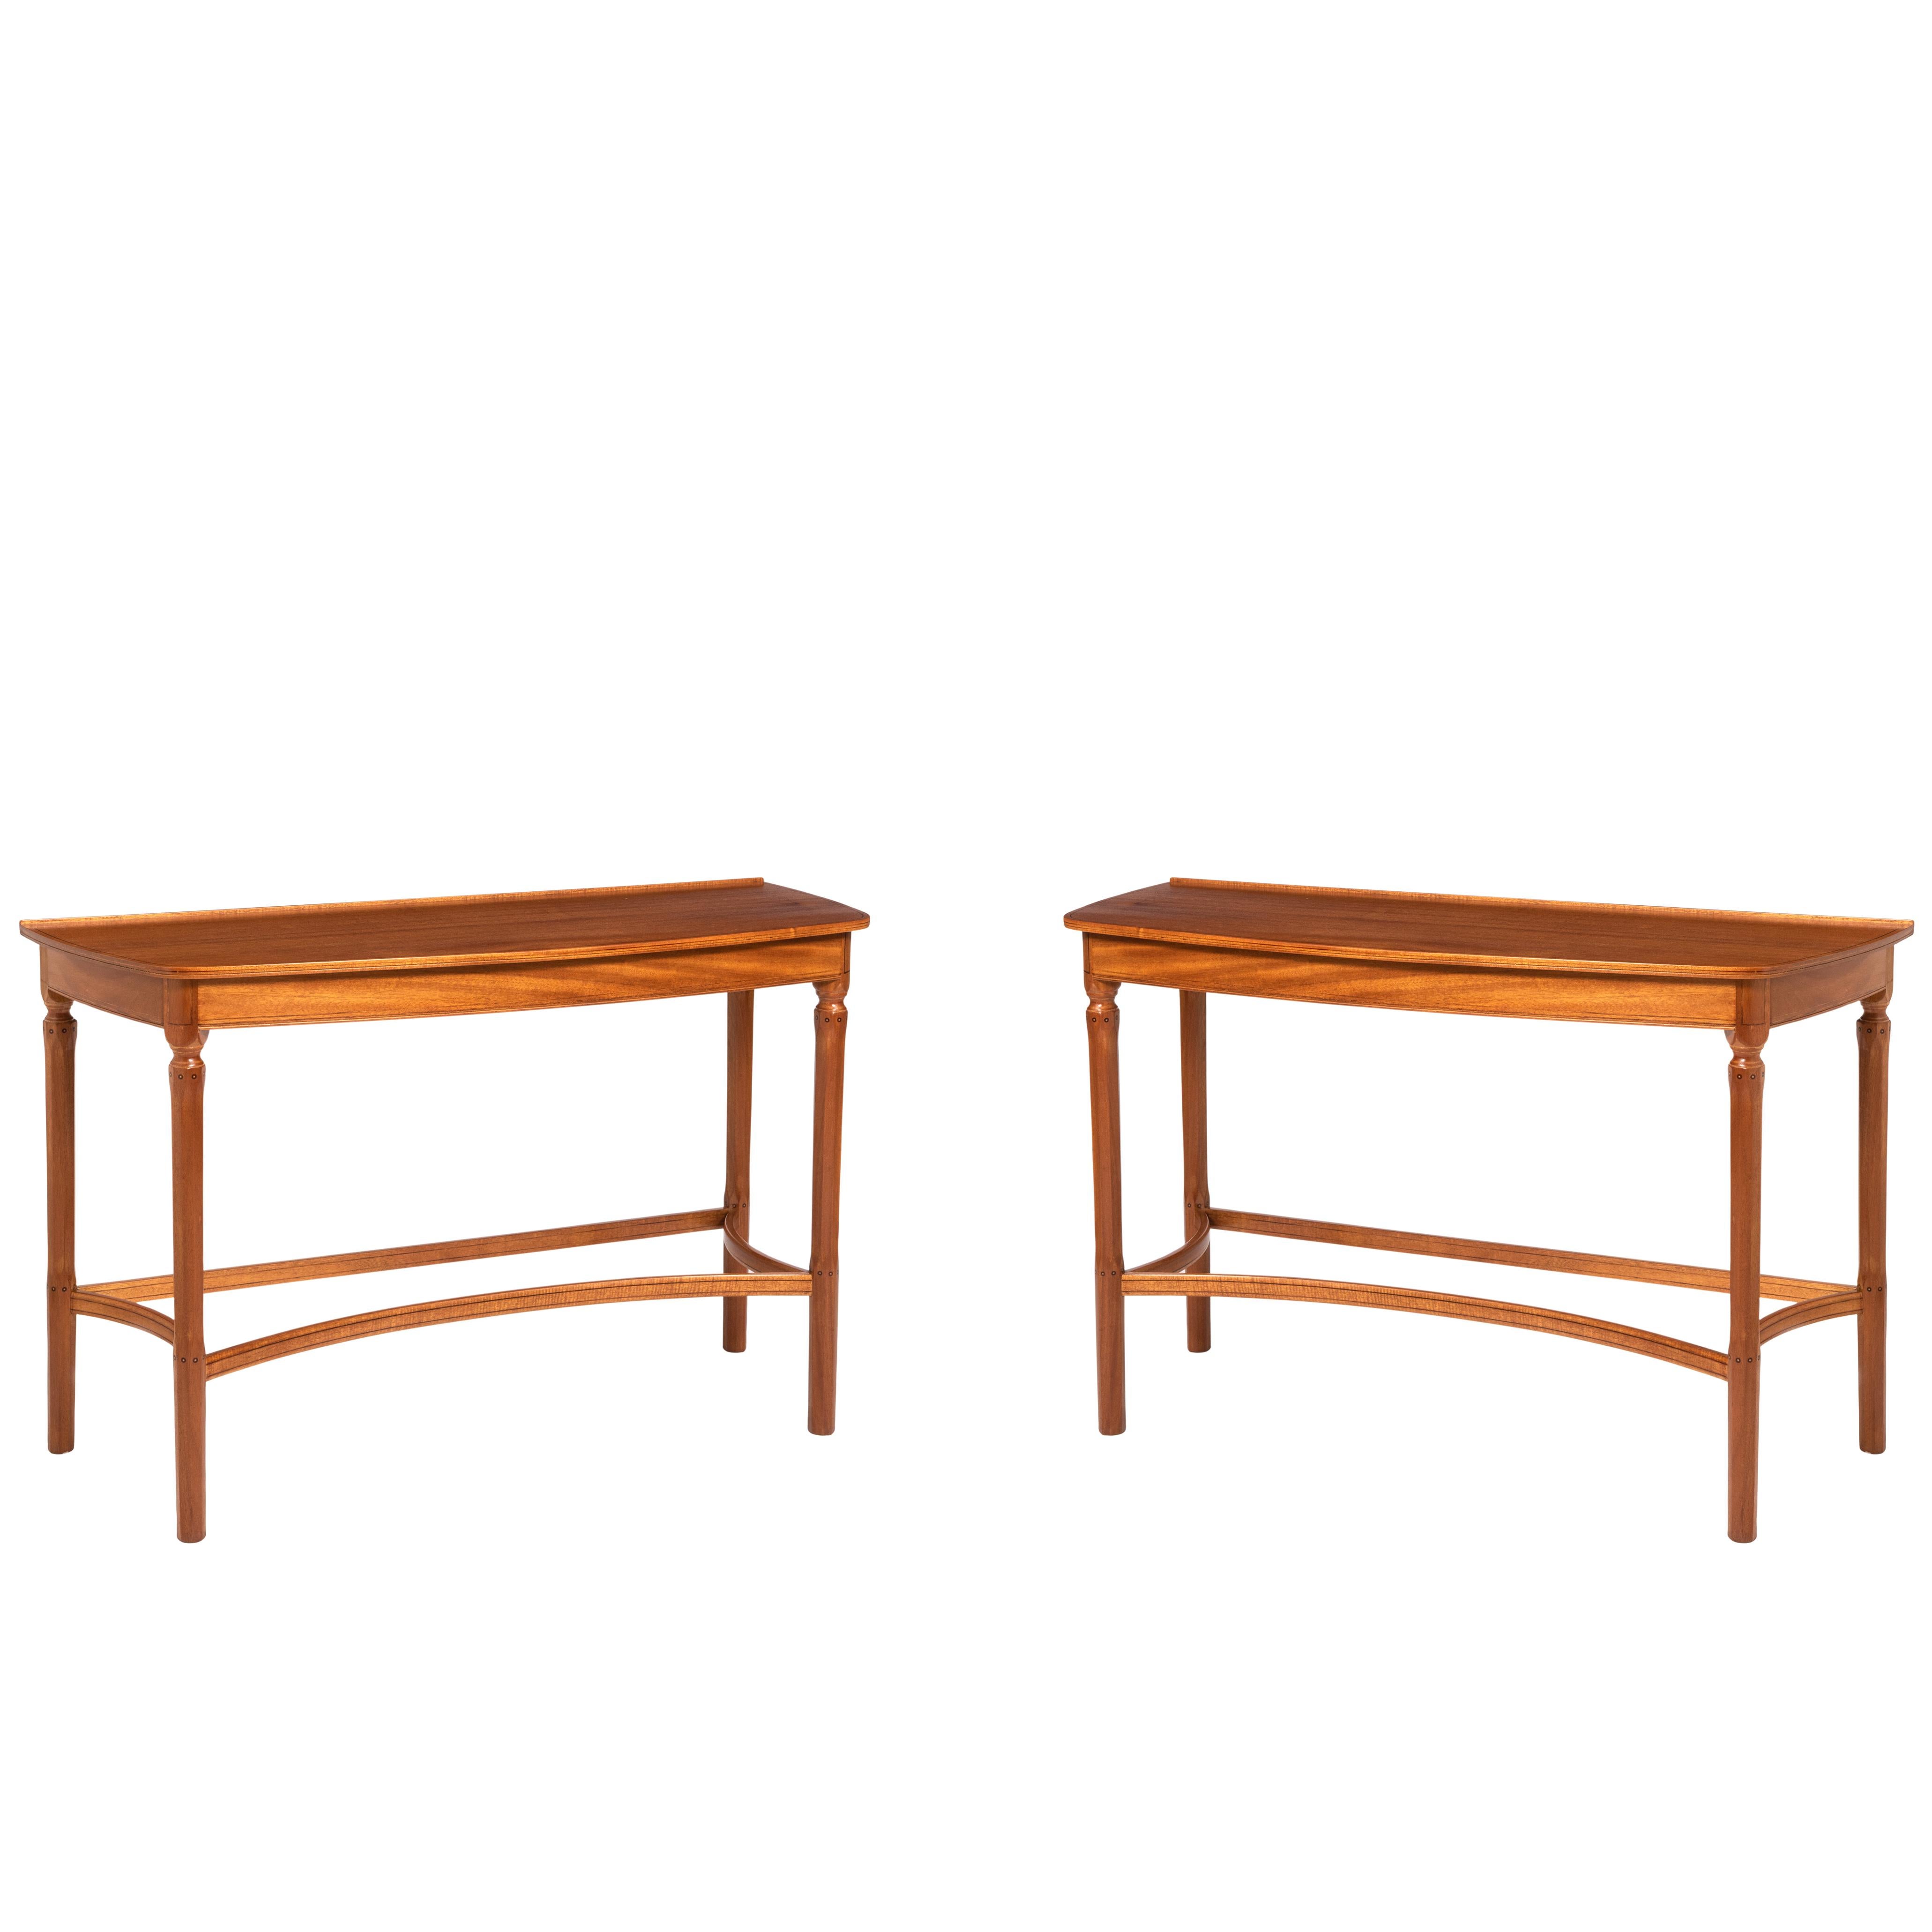 Pair of African Mahogany Side Tables by Edward Barnsley, England, circa 1956 For Sale